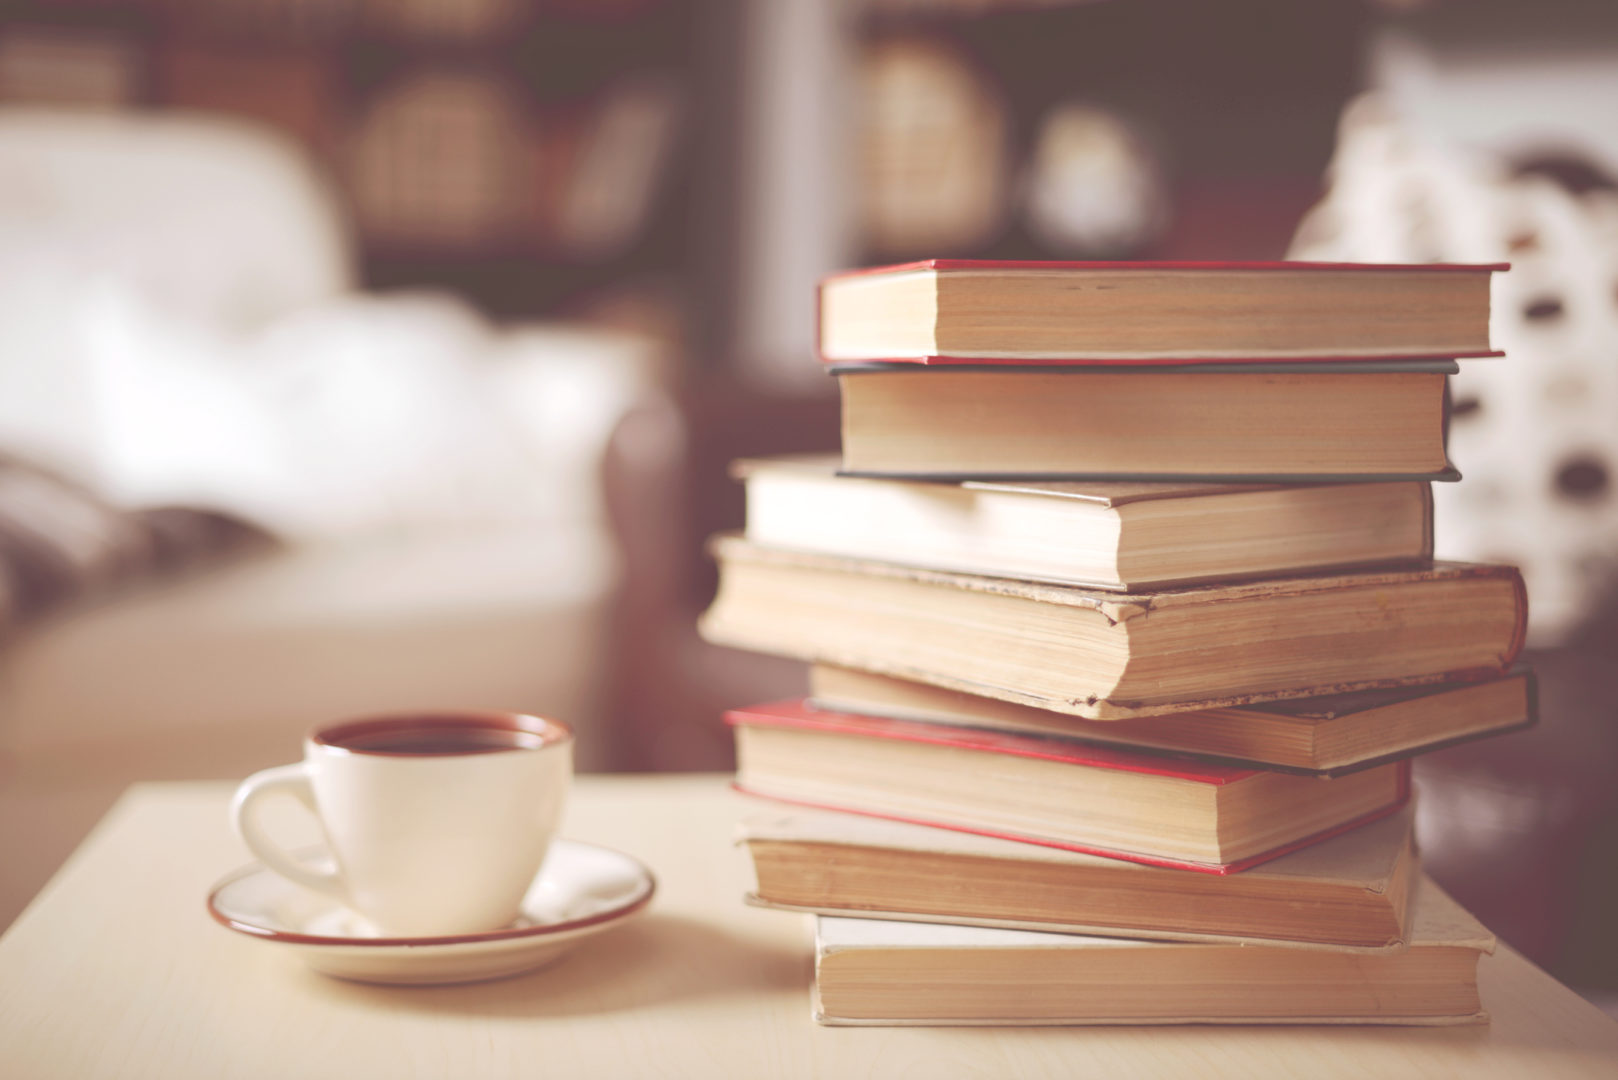 Stack of old books in a home interior with a cup of coffee cup